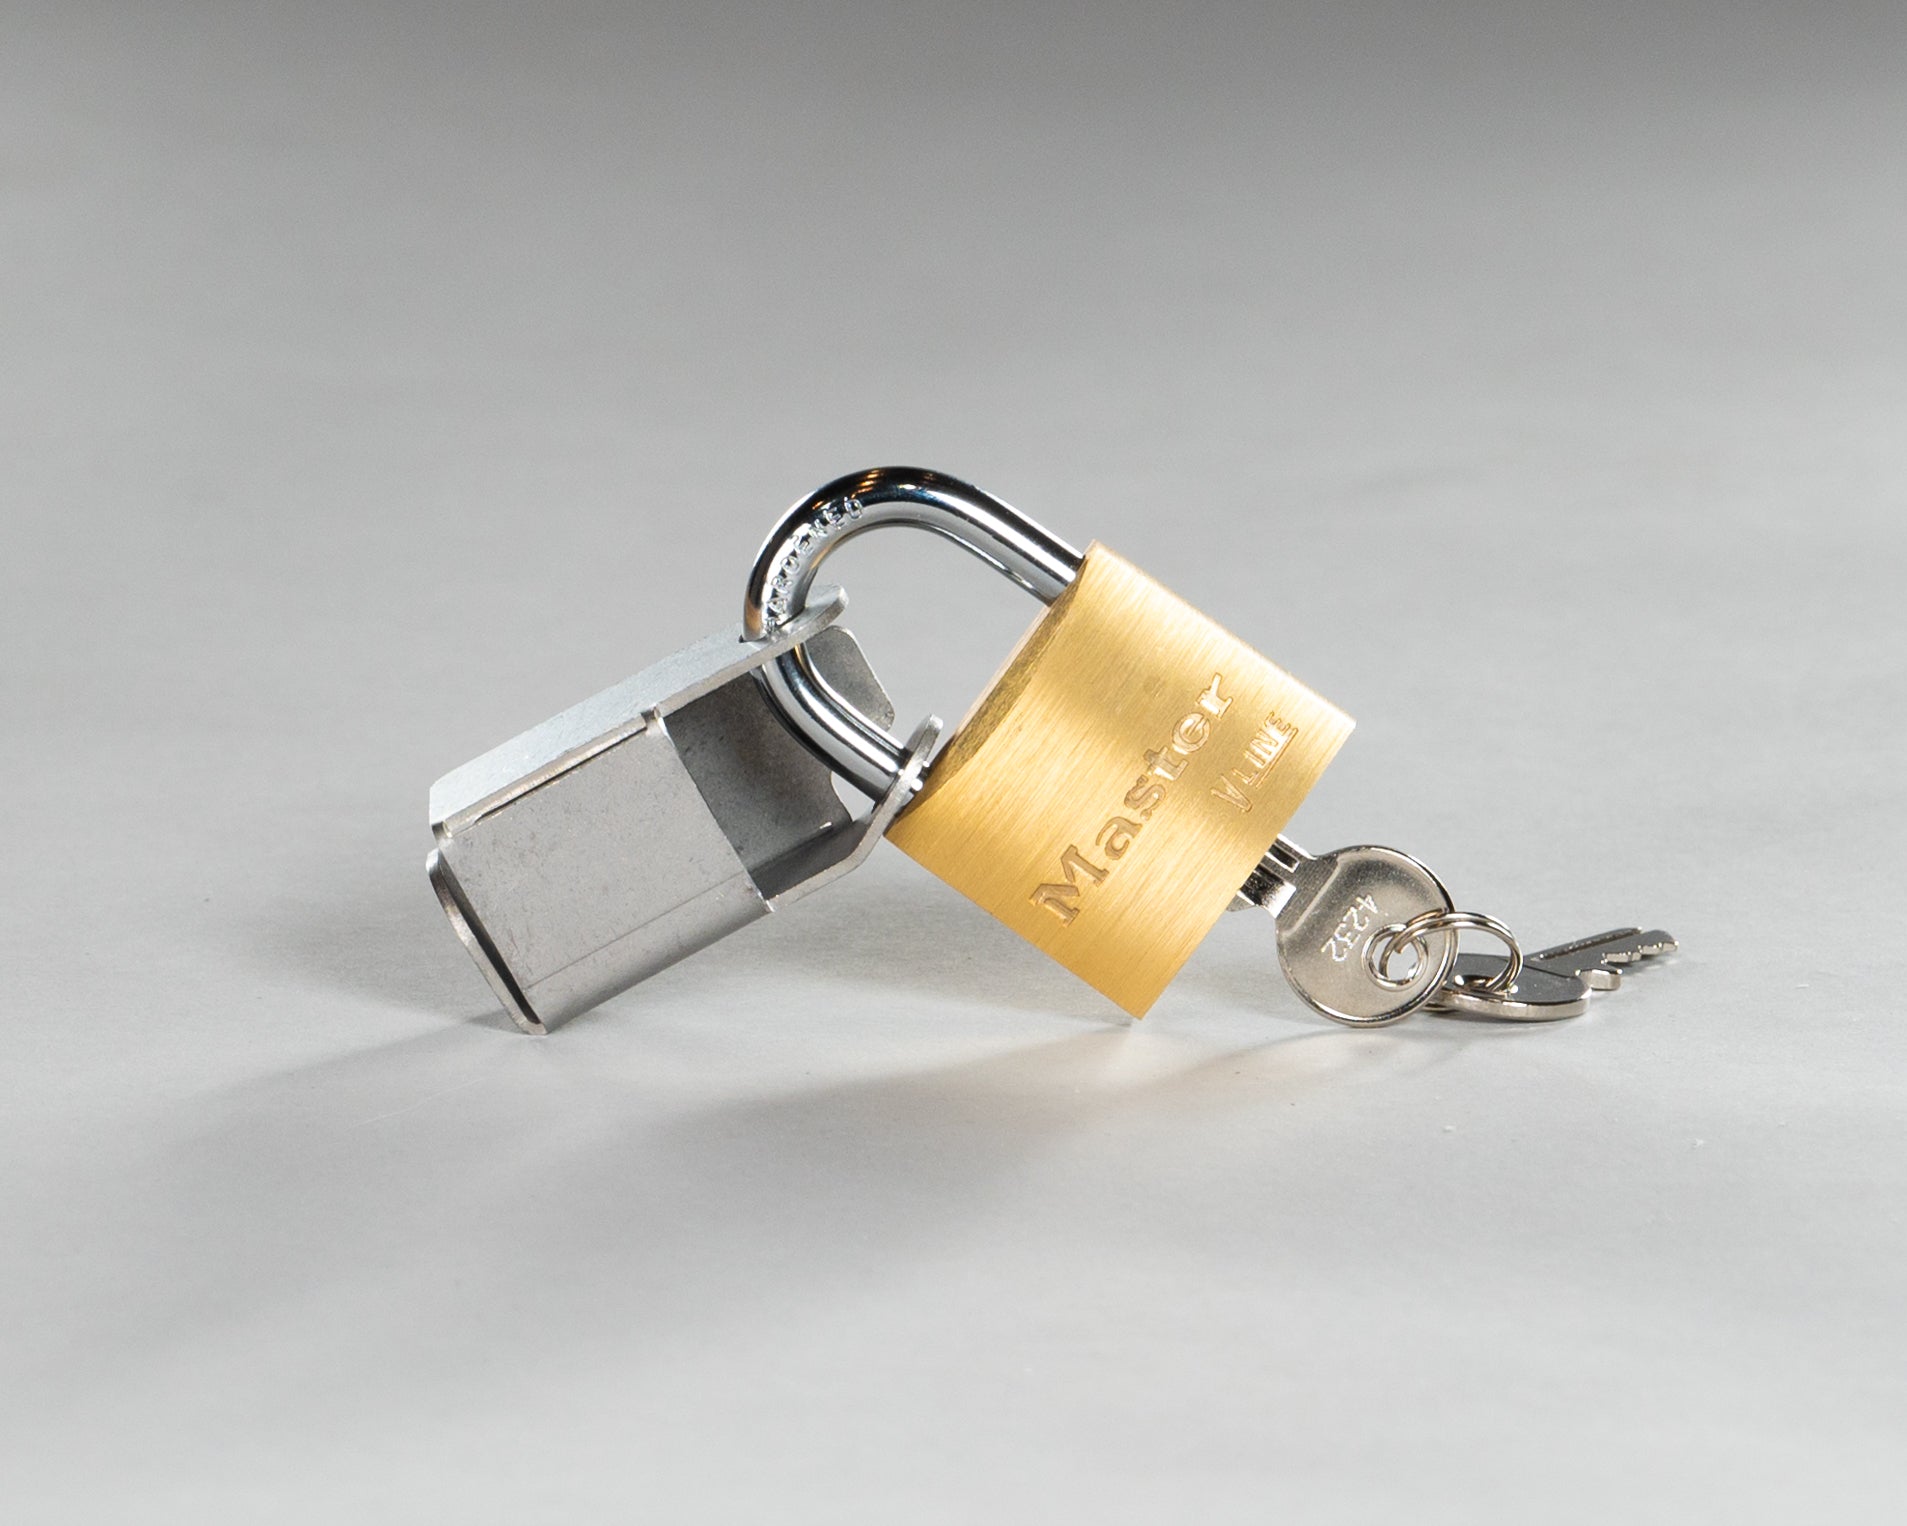 Gold padlock attached to lock bracket with keys